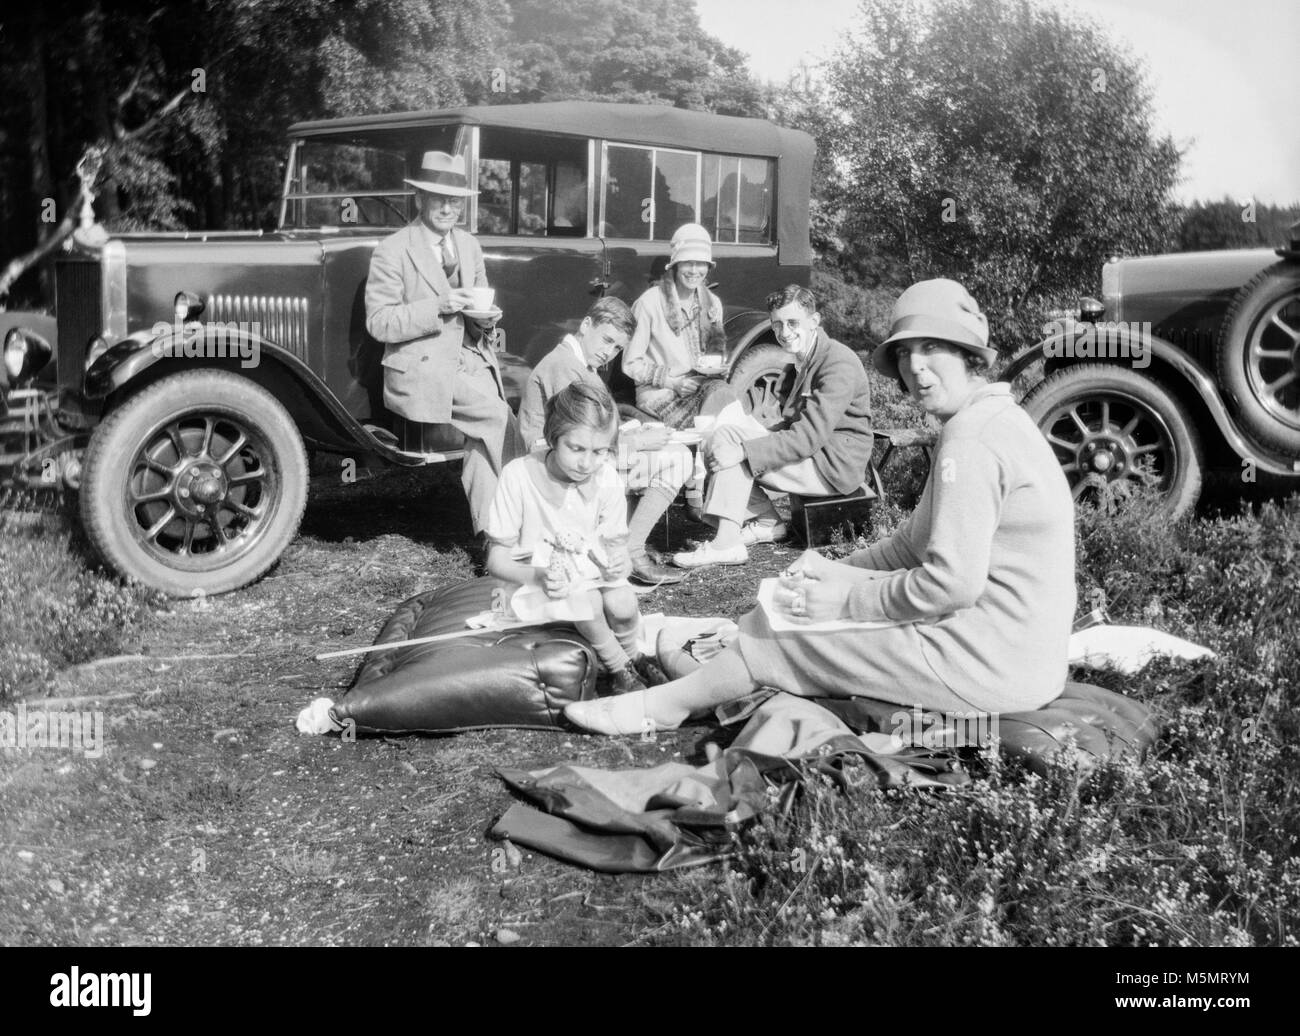 A 1920s image of a family enjoying a picnic with two vintage cars. Stock Photo